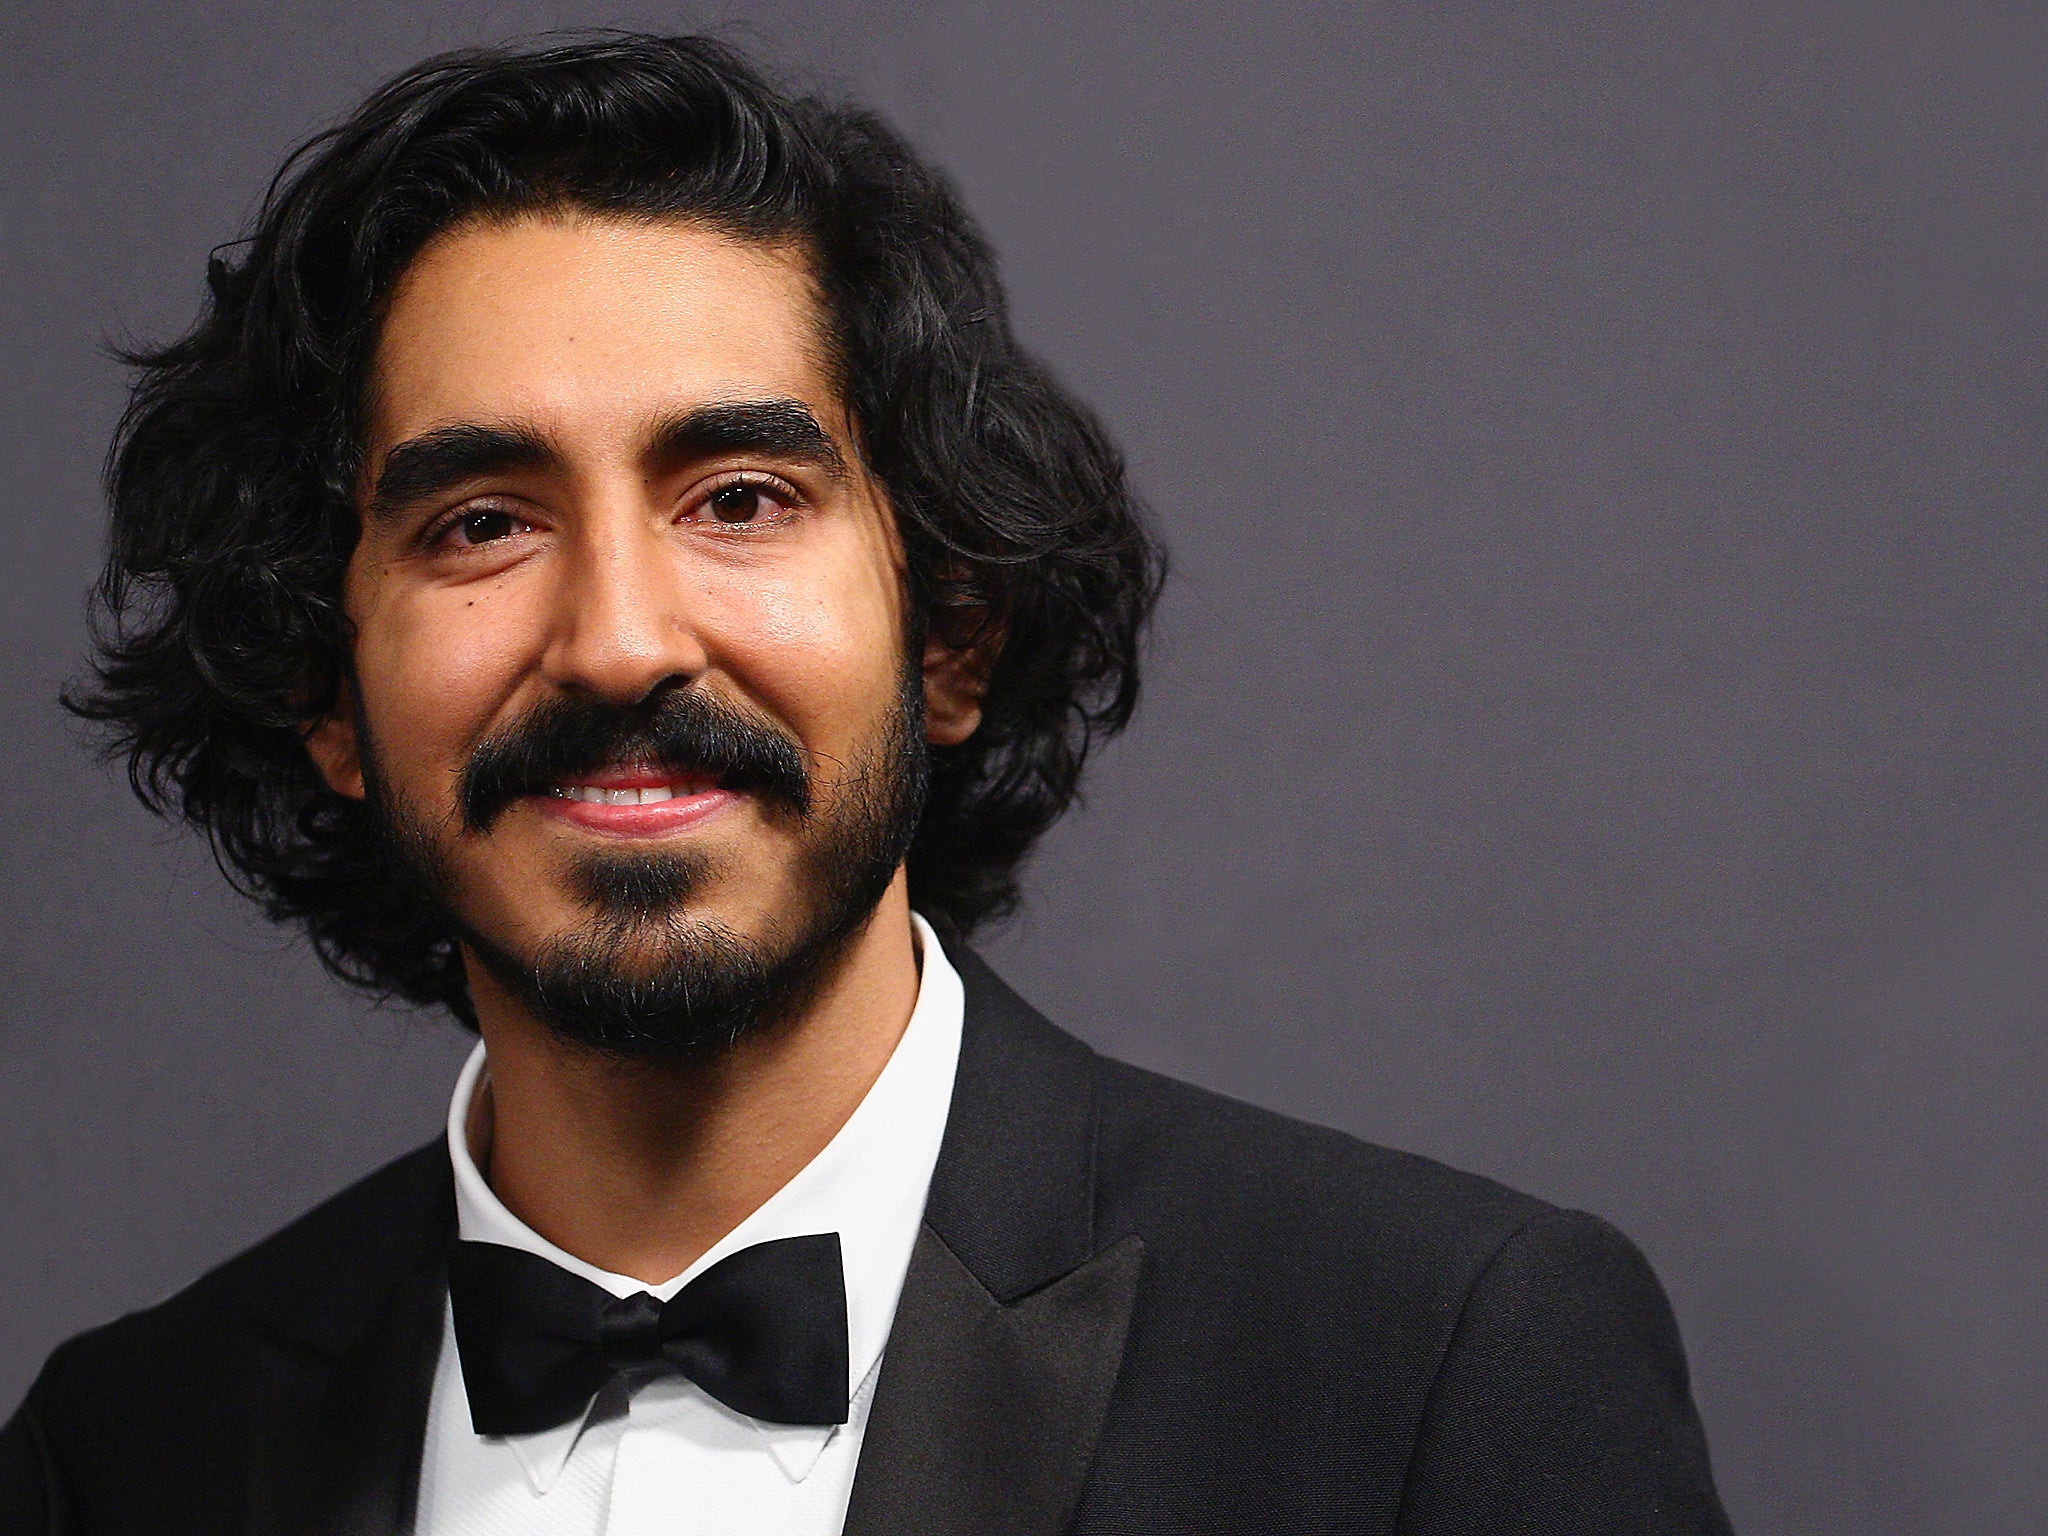 Dev Patel interview: Lion star discusses Golden Globes, speaking Australian  and feeling like a 'goofy celery stick' | The Independent | The Independent